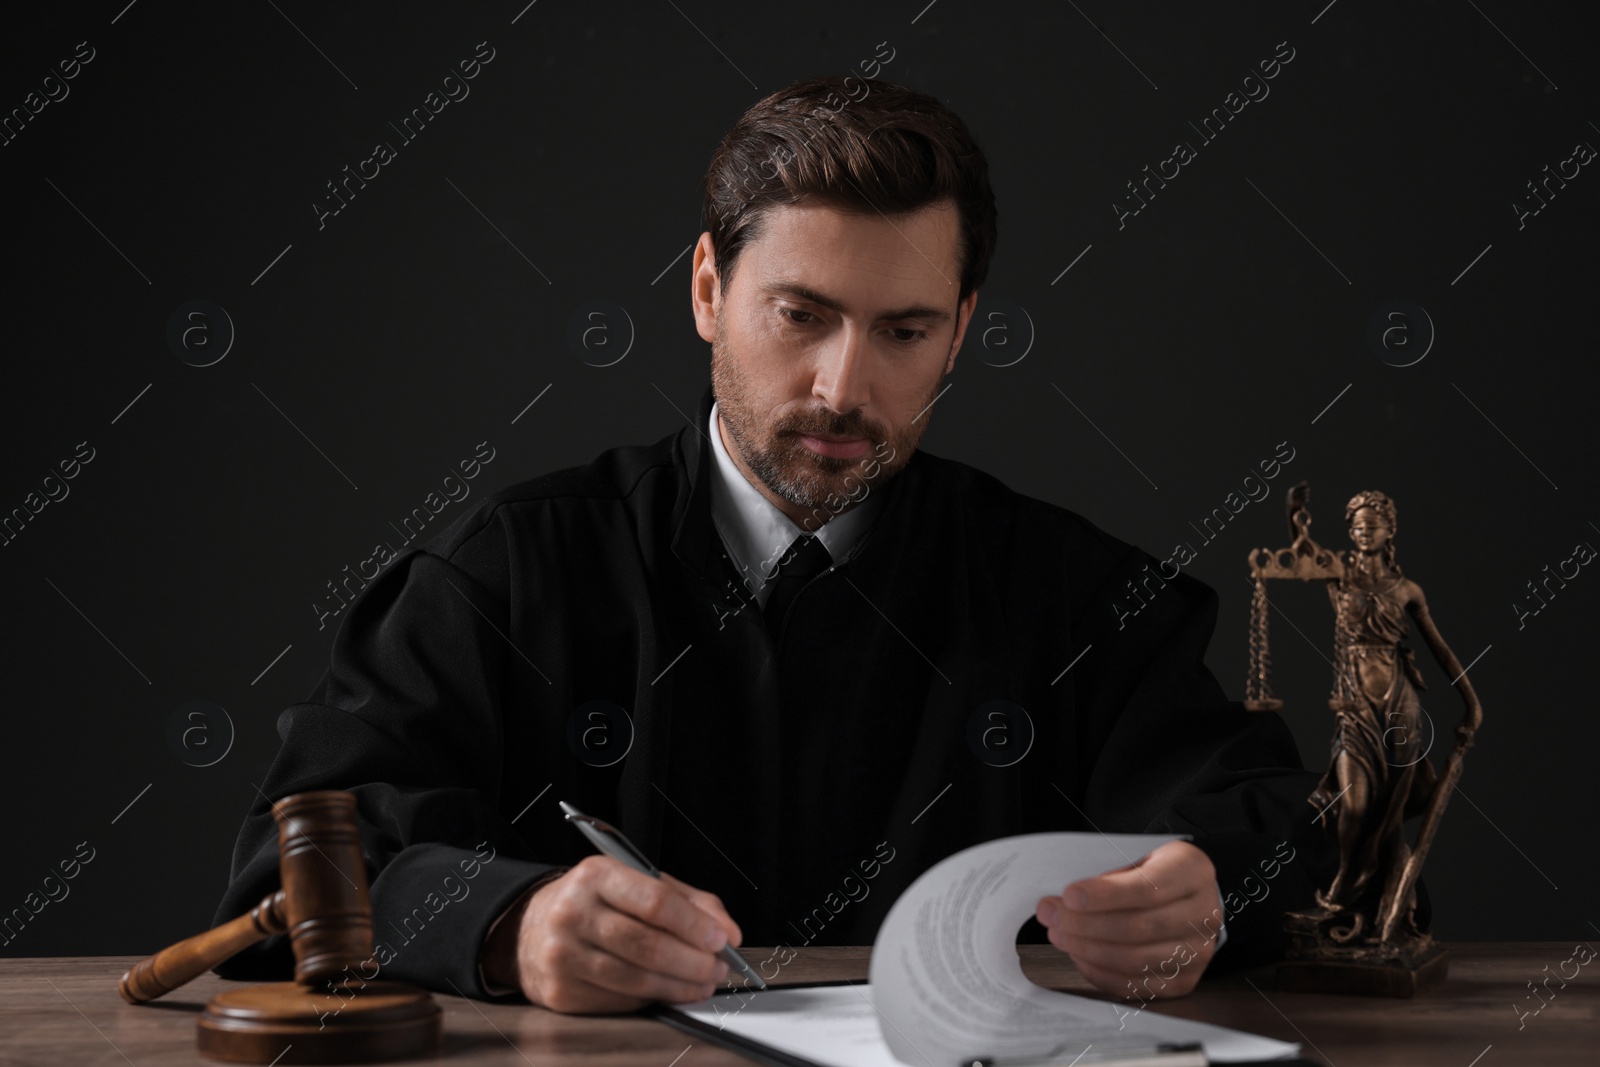 Photo of Judge with gavel writing in papers at wooden table against black background